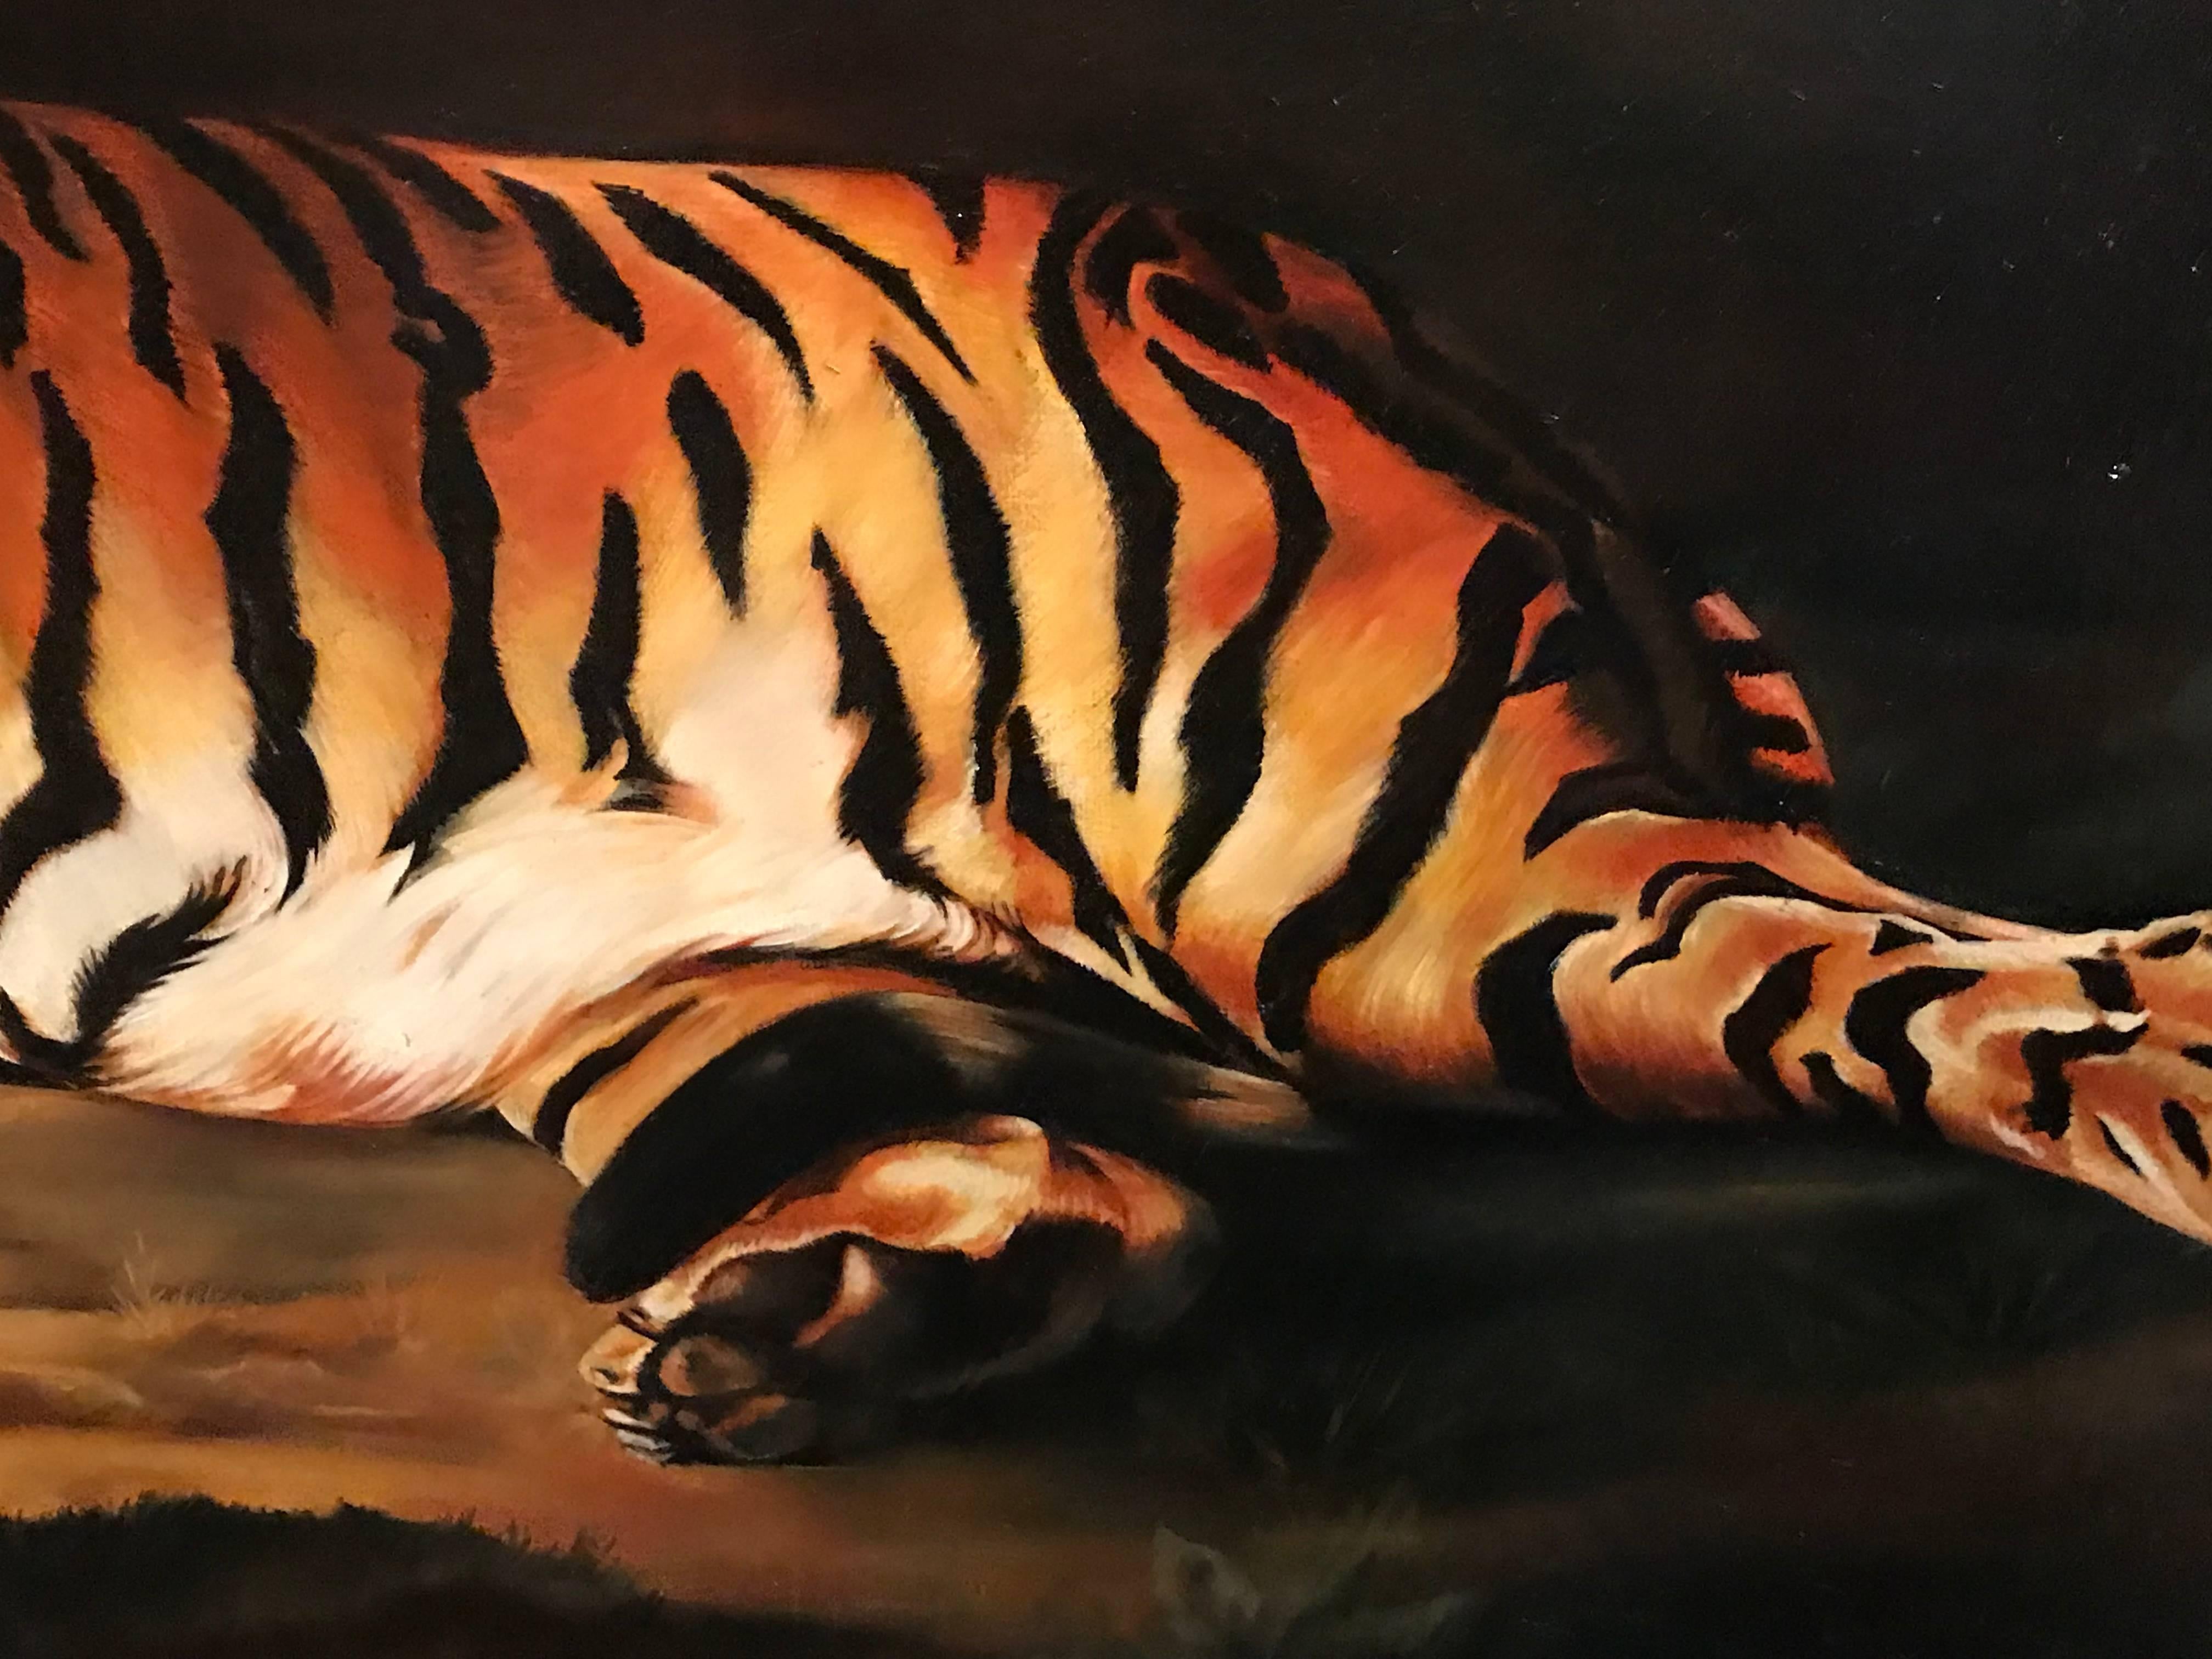 The Bengal Tiger
British School, circa 1980's
after George Stubbs
oil painting on canvas, framed

framed: 26 x 50 inches

Stunning oil painting on canvas, painted on a huge scale (the frame measures 26 x 50 inches) depicting this majestic Bengal